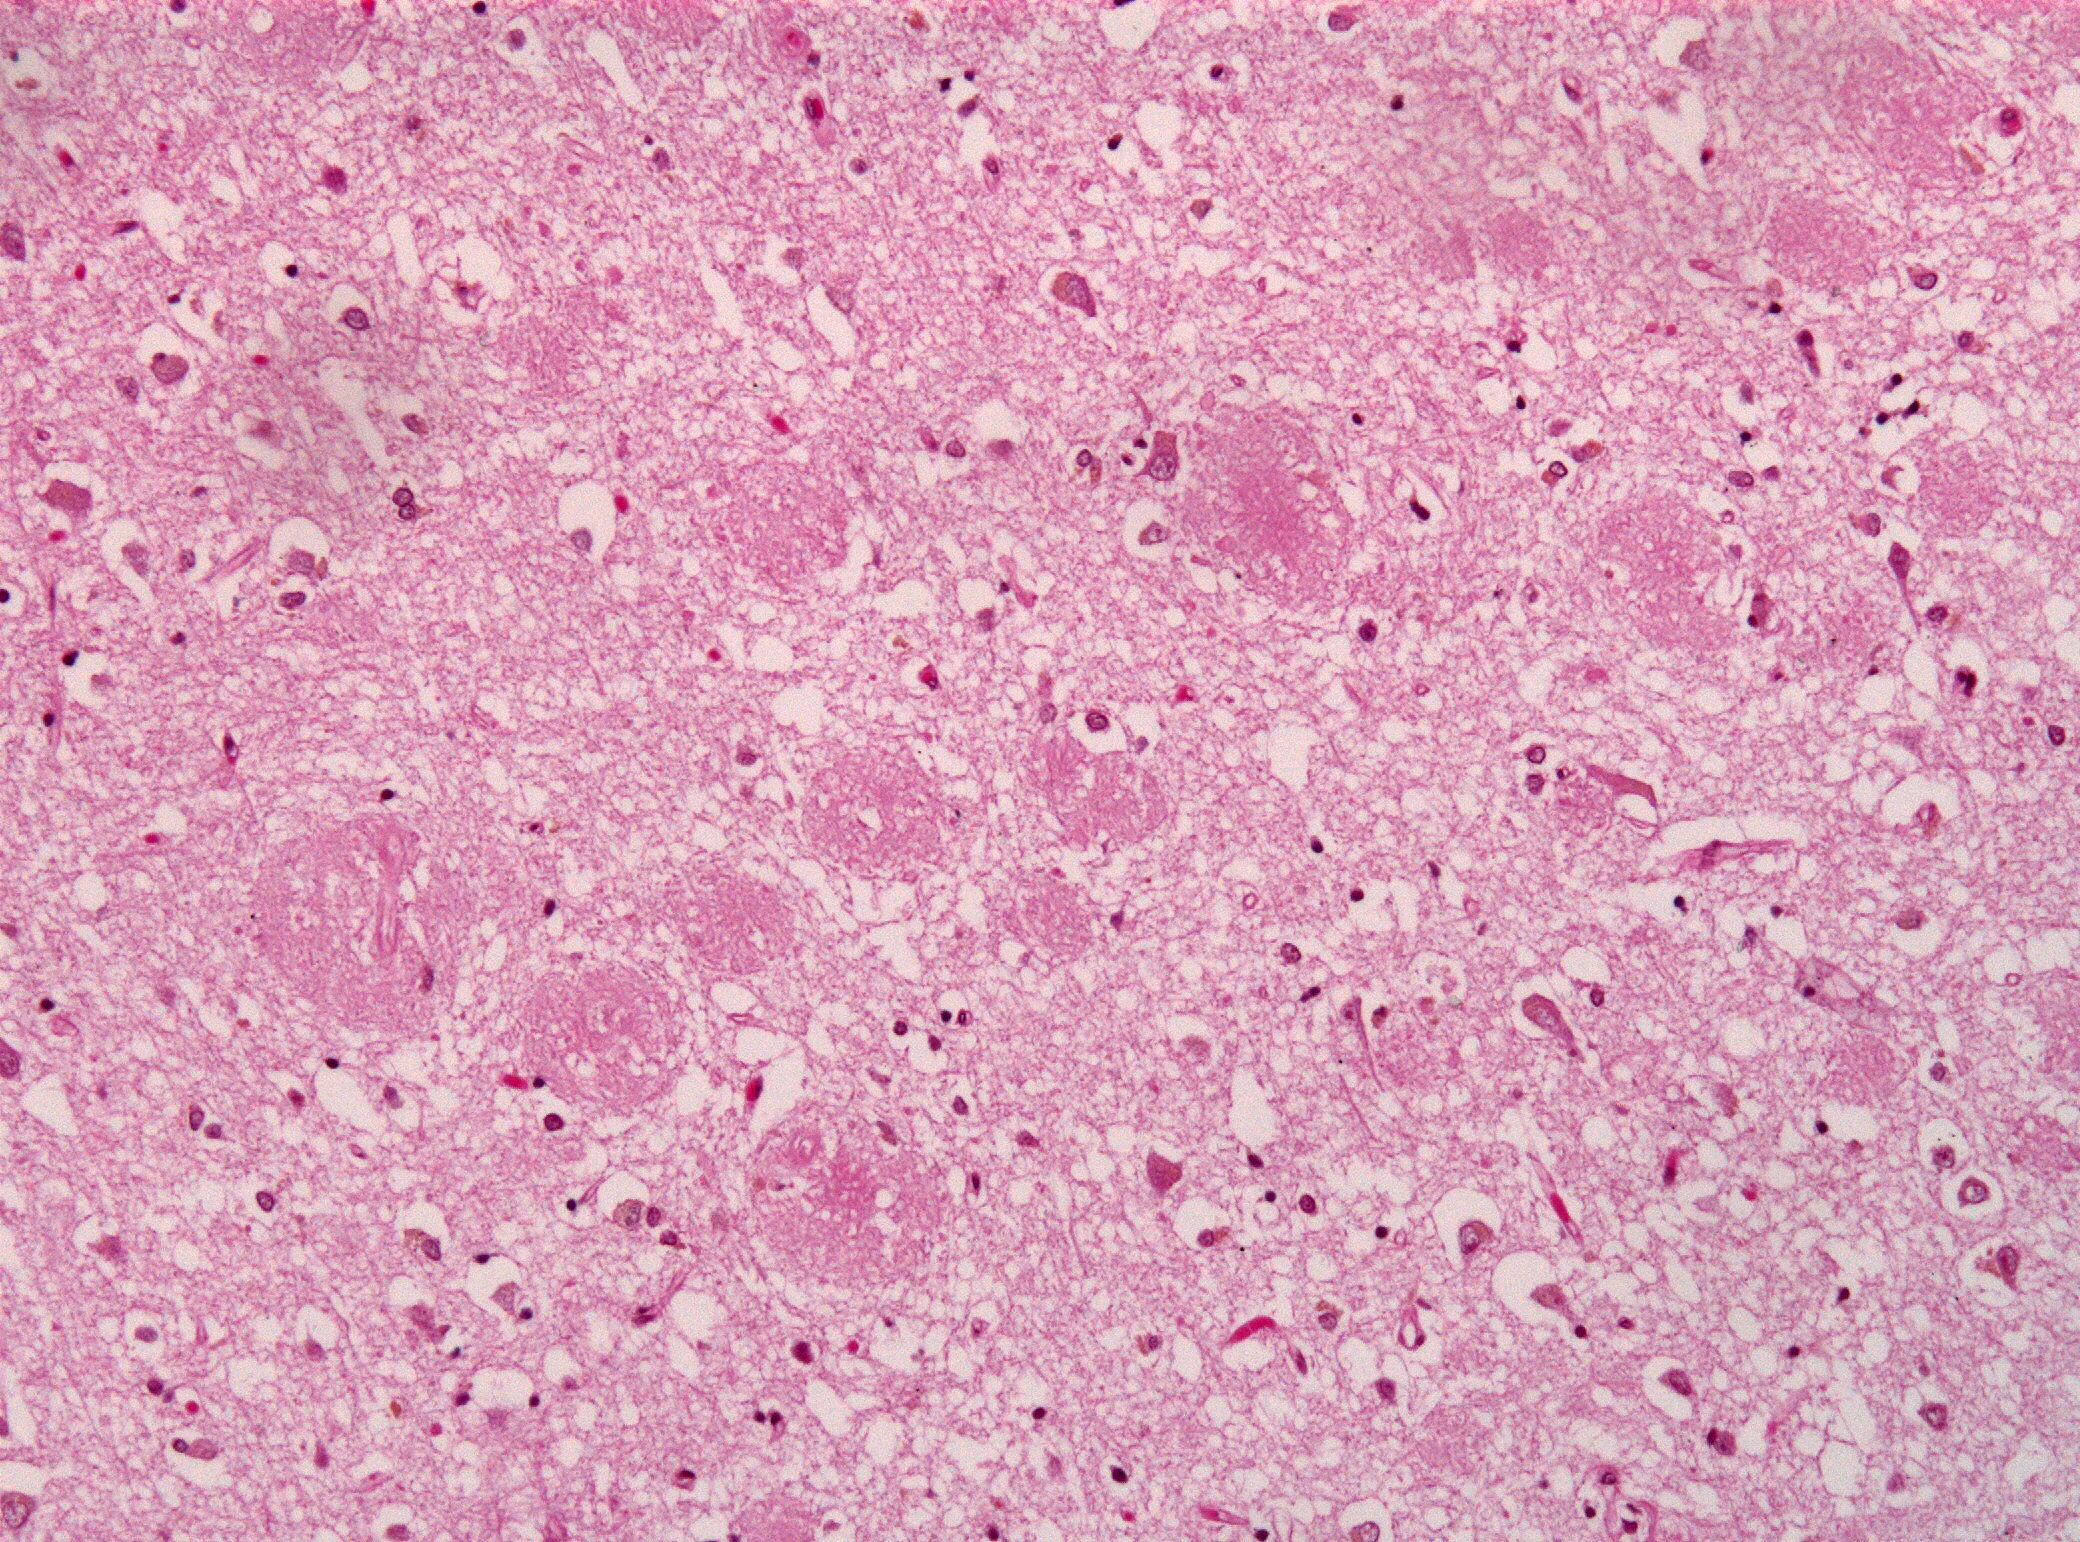 Amyloid plaques in Alzheimers disease